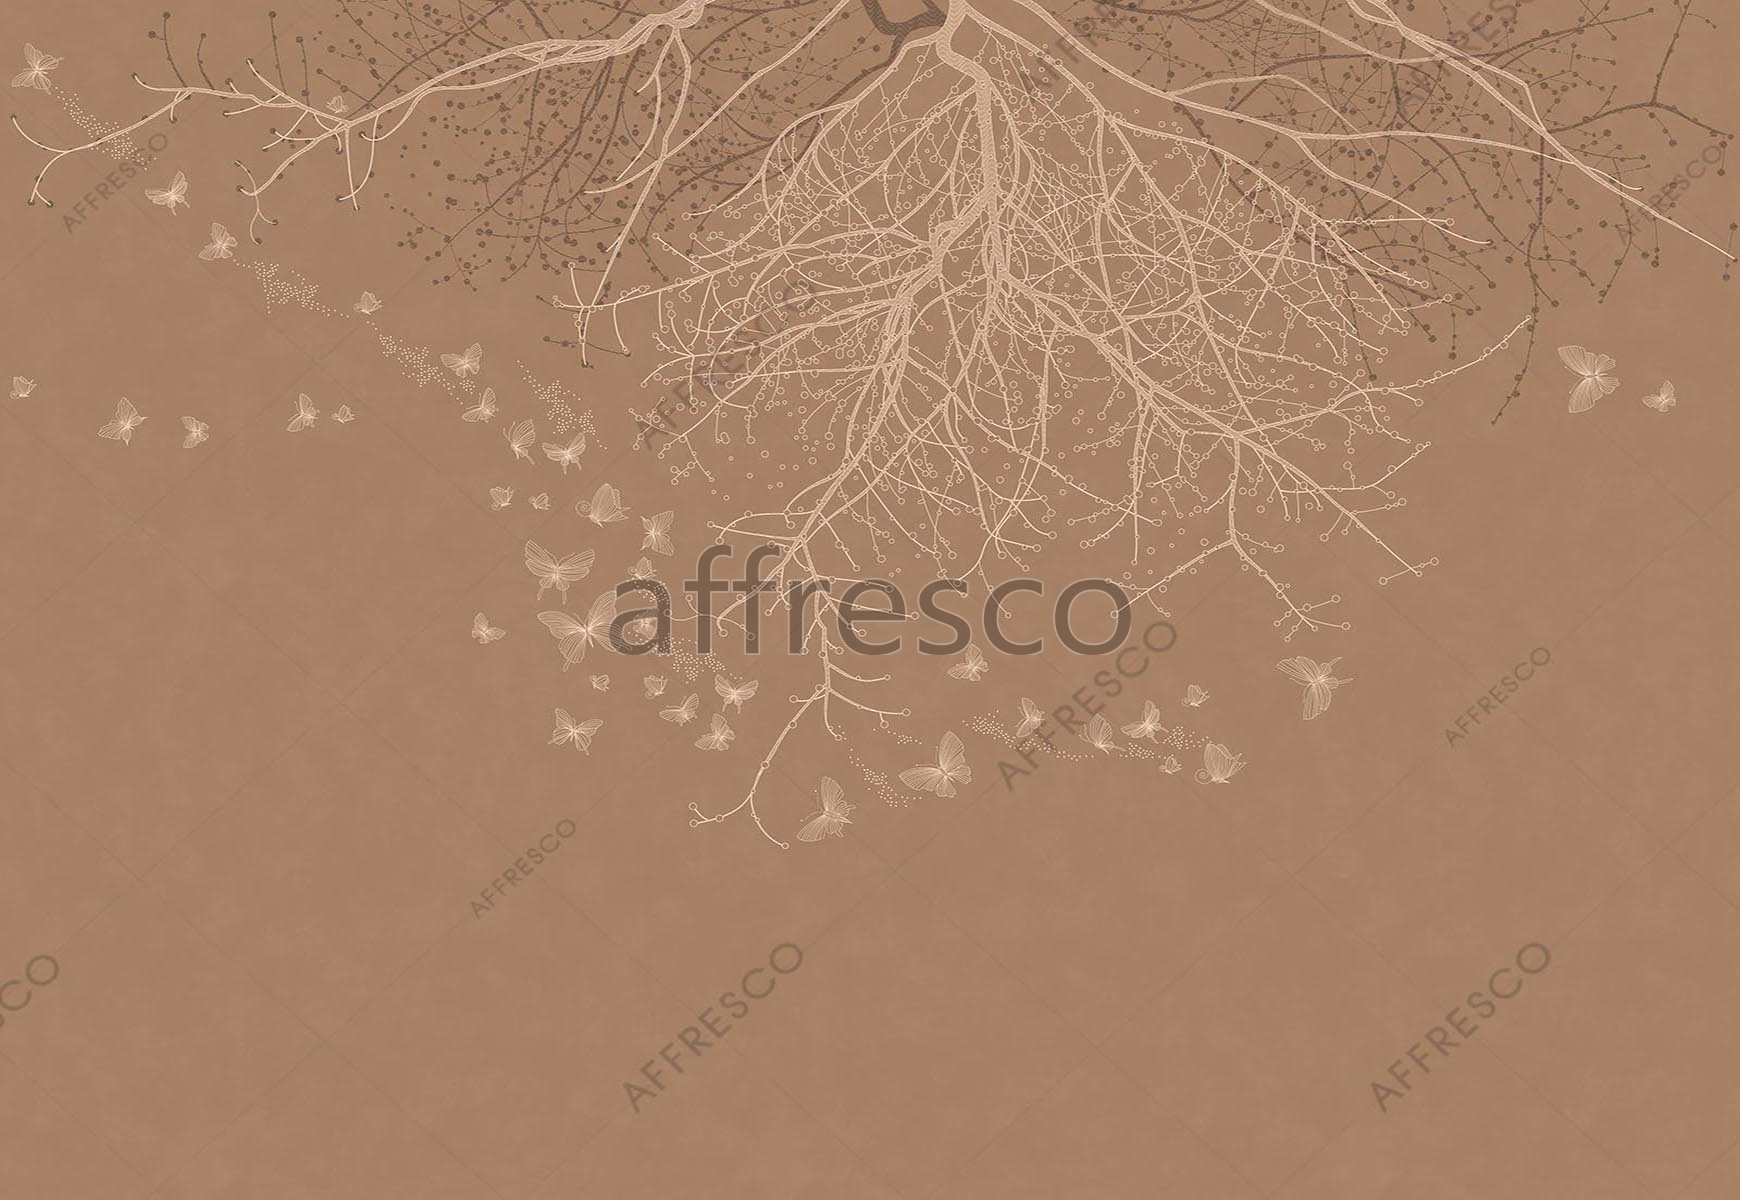 ID139246 | Forest | Branches and butterflies | Affresco Factory